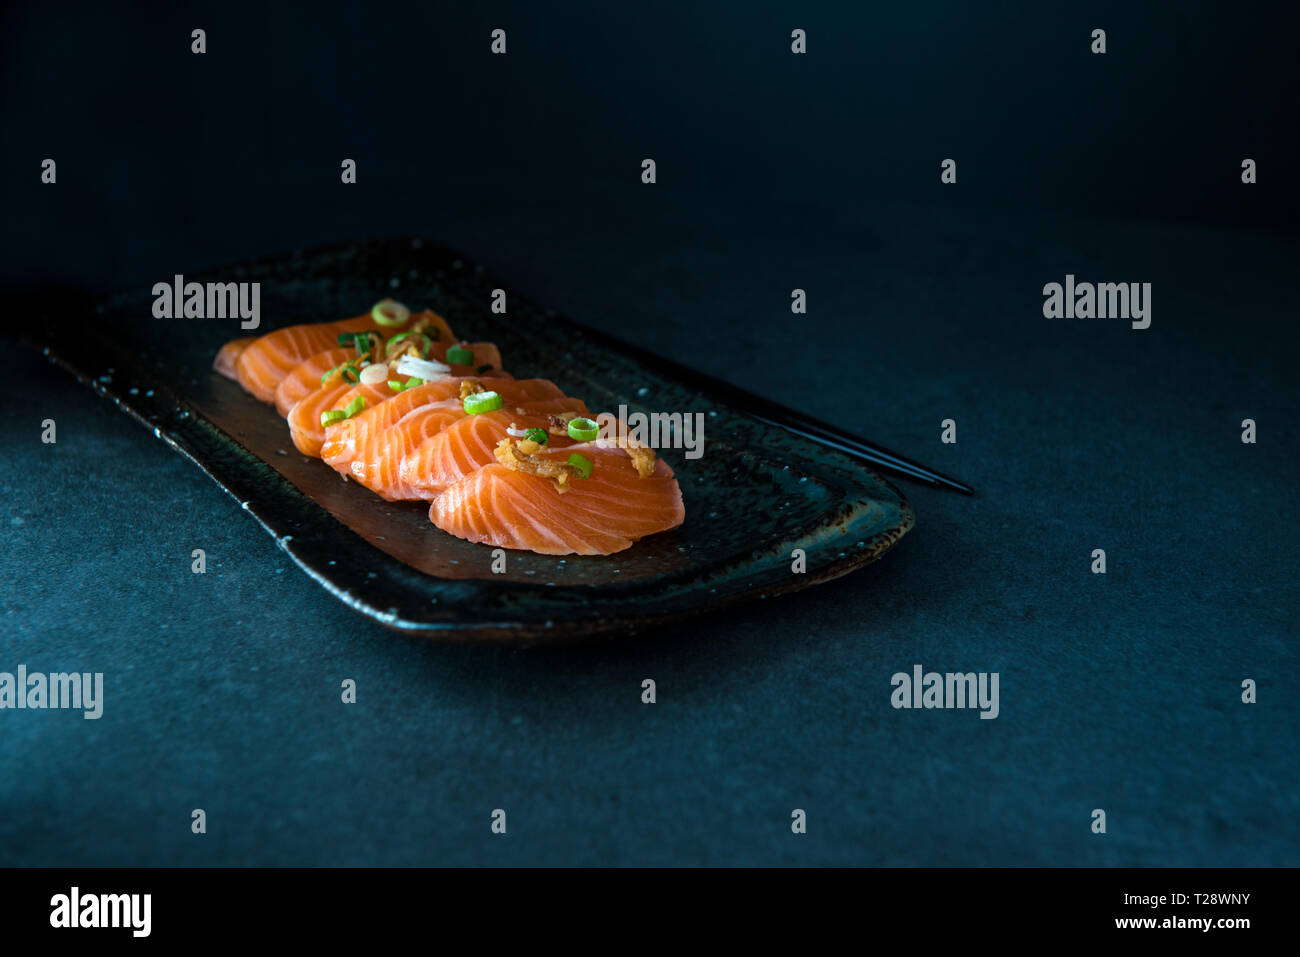 Sliced salmon sashimi on plate with dark background and copy space, low key image Stock Photo